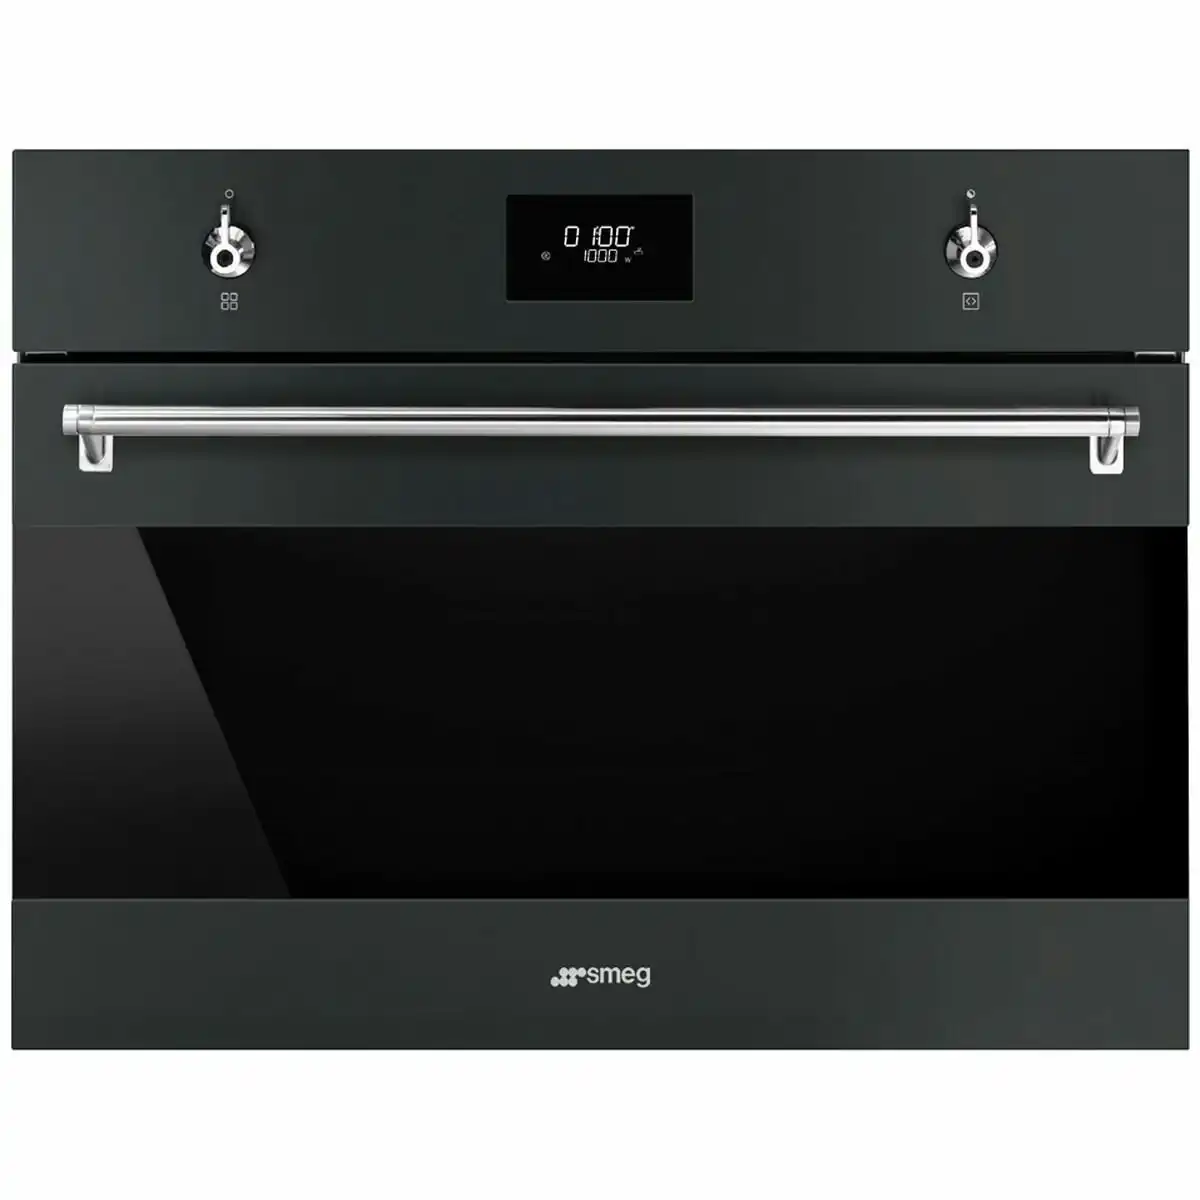 SMEG 60cm Classic Compact Speed Built-In Oven